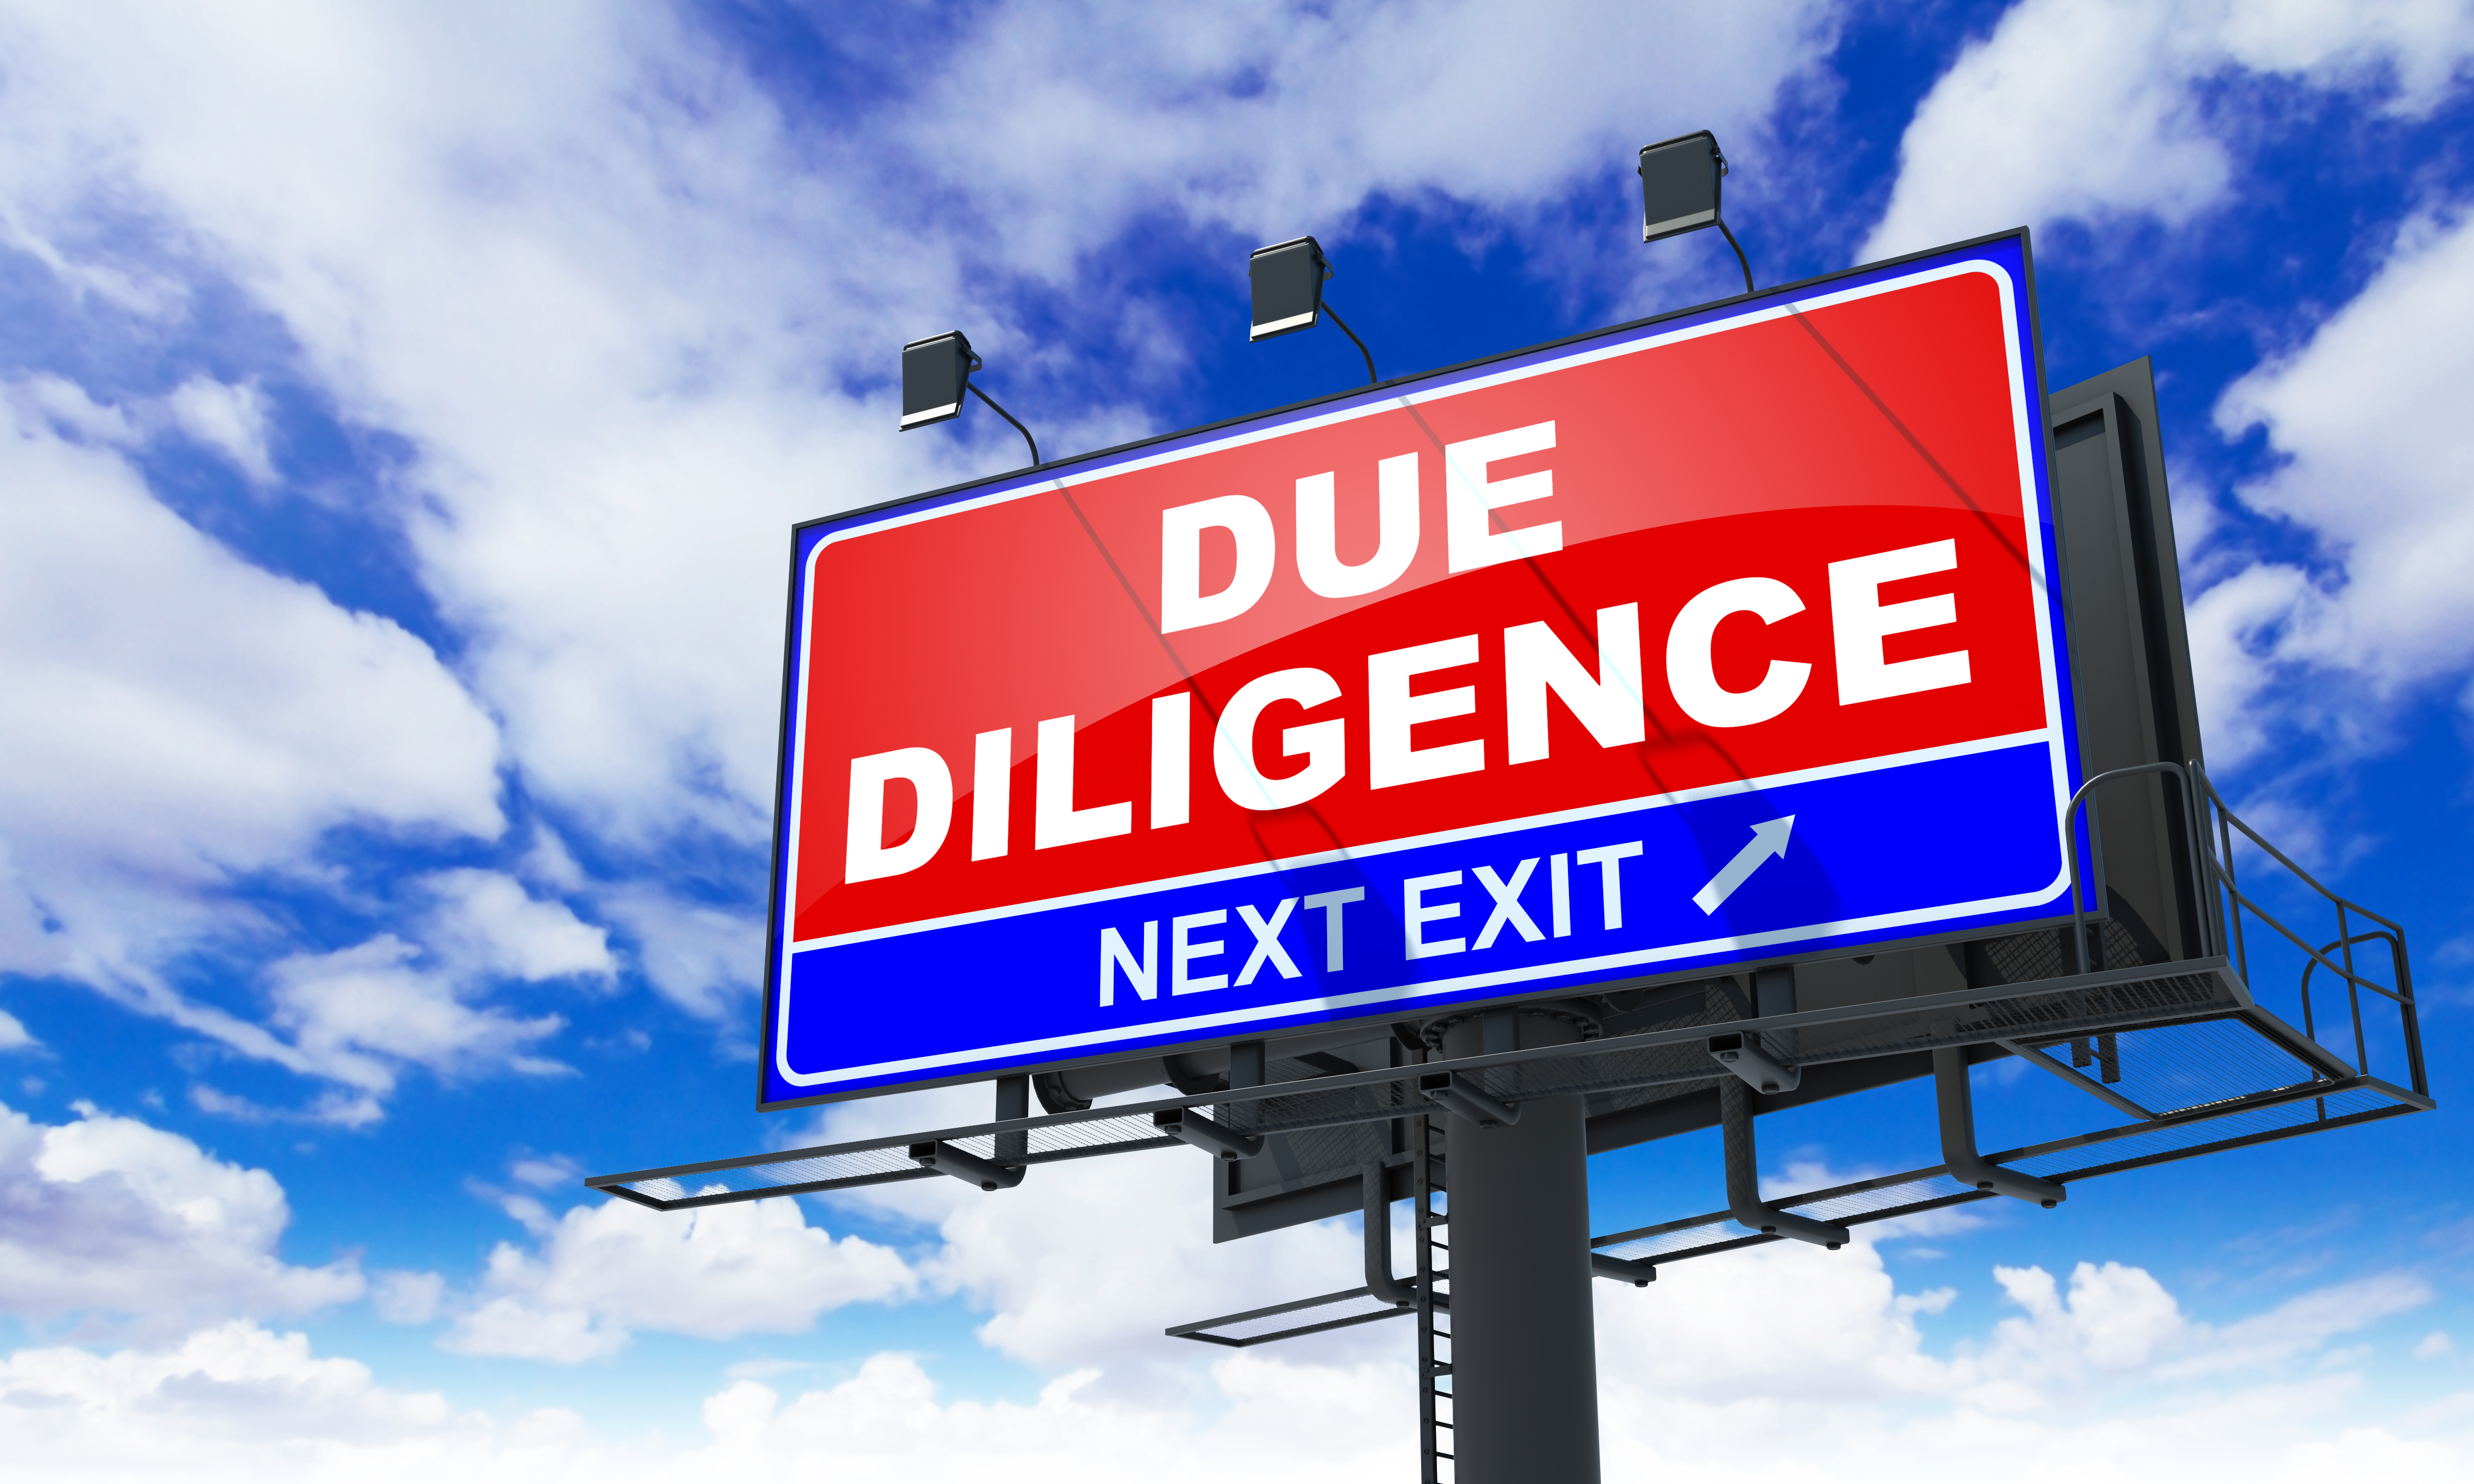 NFT, Due Diligence - https://depositphotos.com/58503825/stock-photo-due-diligence-on-red-billboard.html